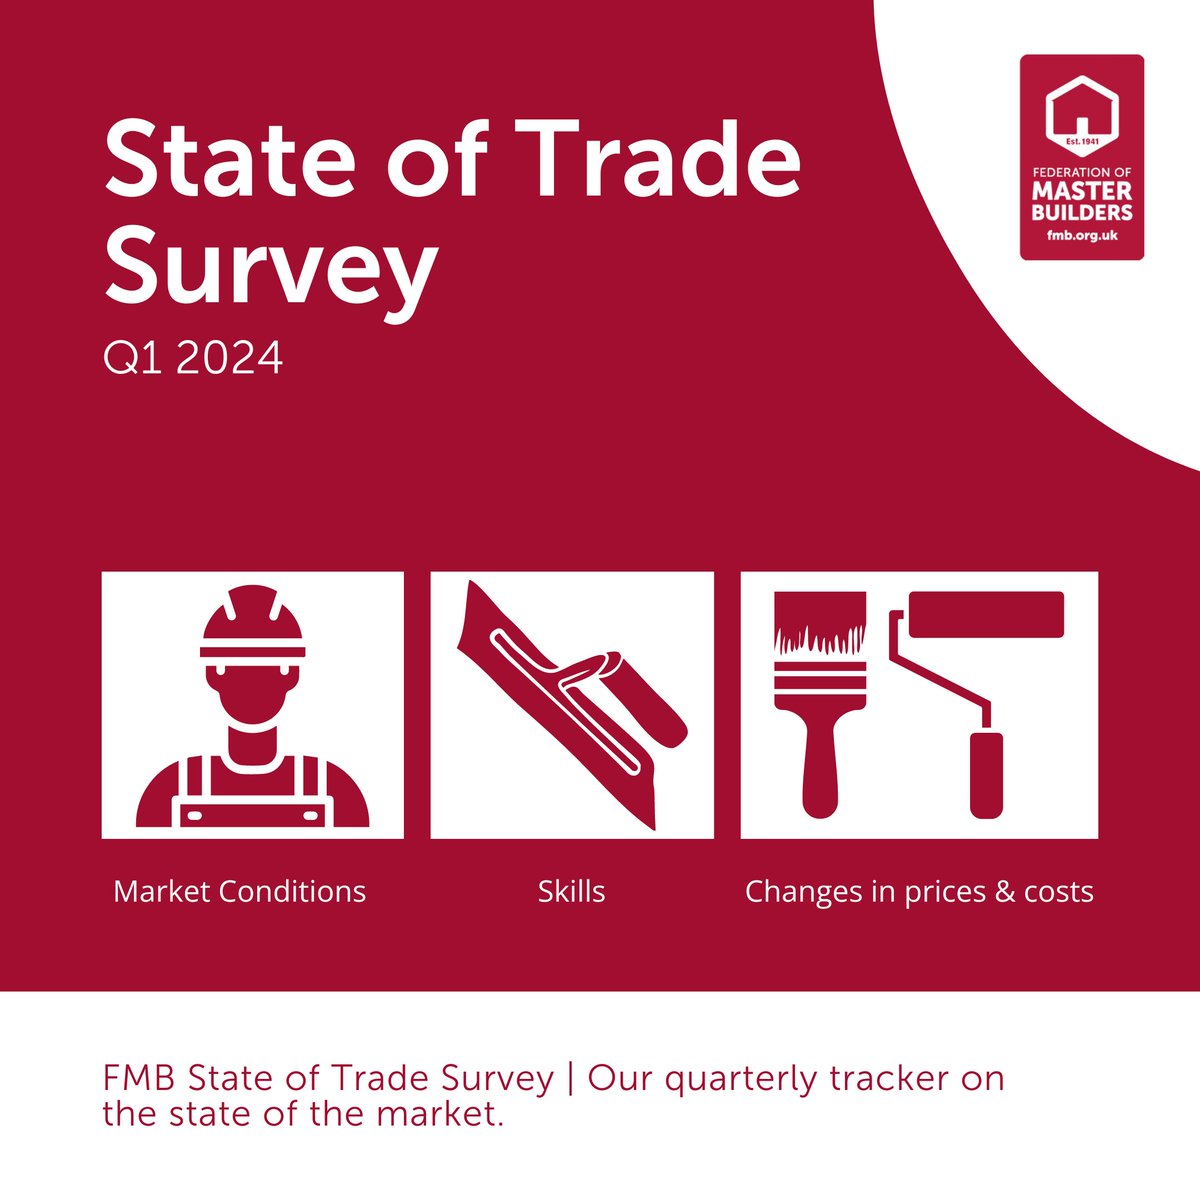 🏗️ From market conditions to skills shortages and cost increases—our State of Trade Survey for Q1 2024 covers it all. Thank you to our members for your invaluable insights. Your experiences help shape a clearer future for the UK construction industry. fmb.org.uk/resource/state…